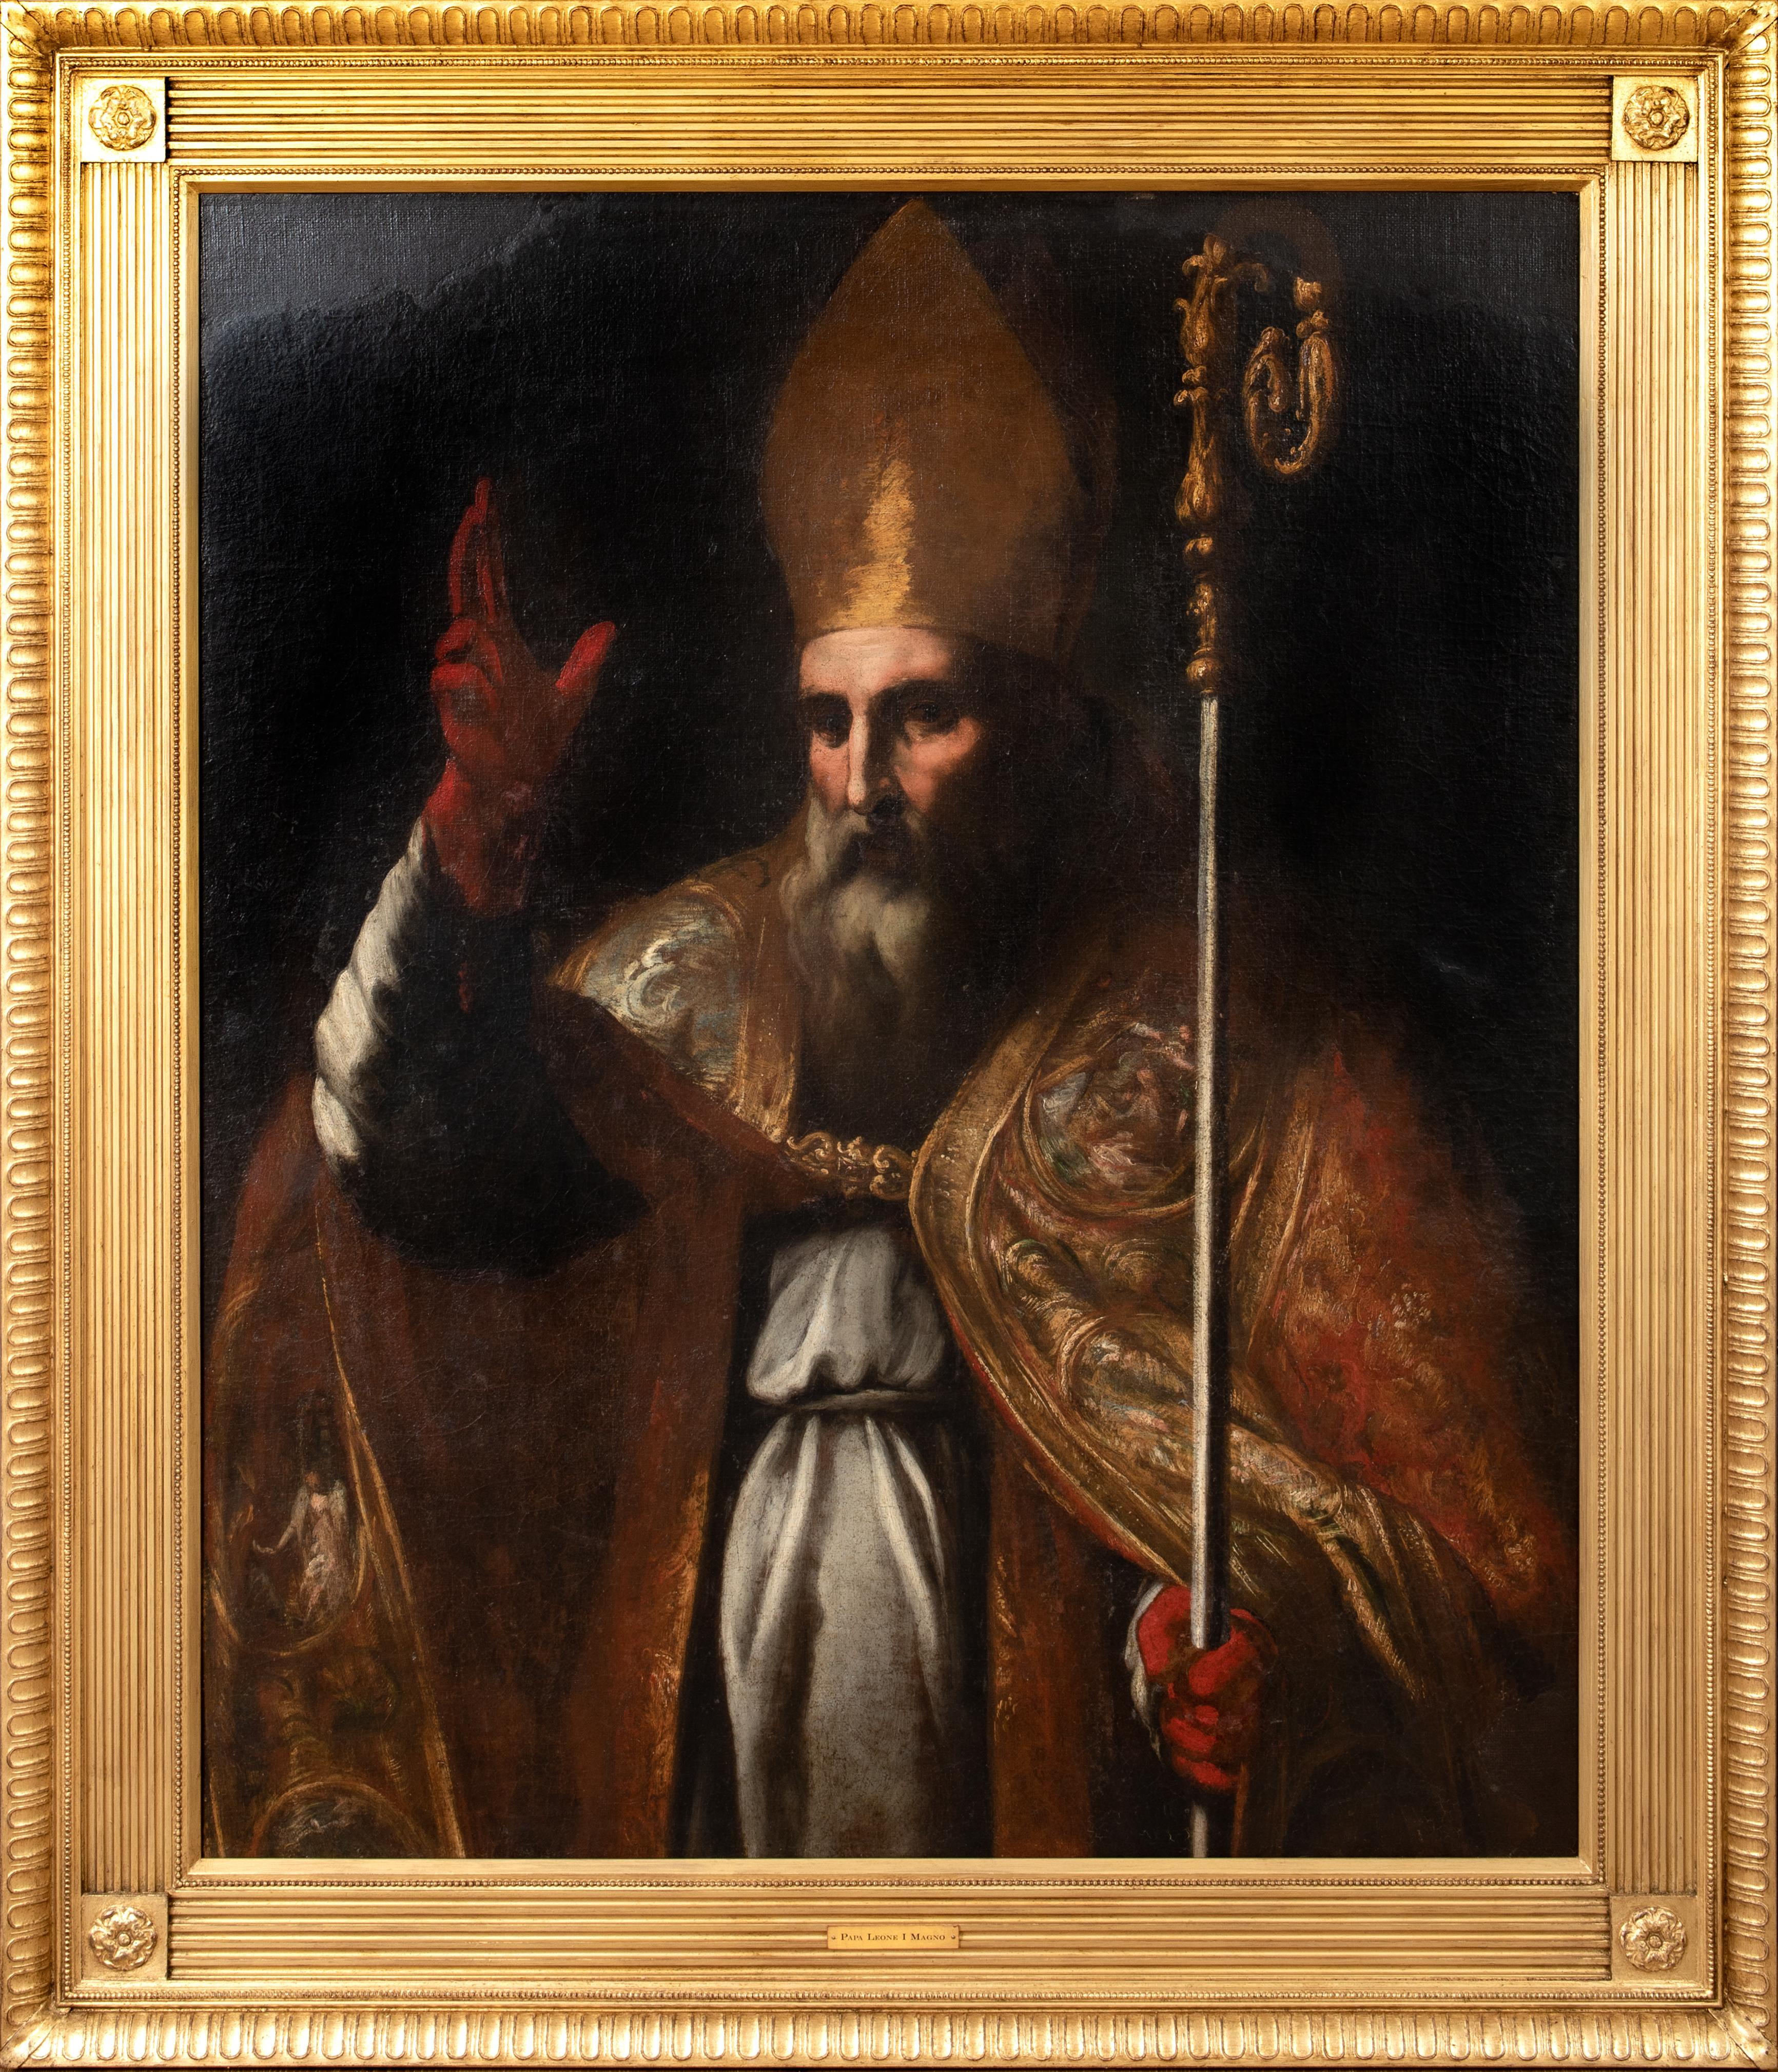 Unknown Portrait Painting - Portrait Of Pope Leo I The Great, Bishop Of Rome (400-461), 17th Century 